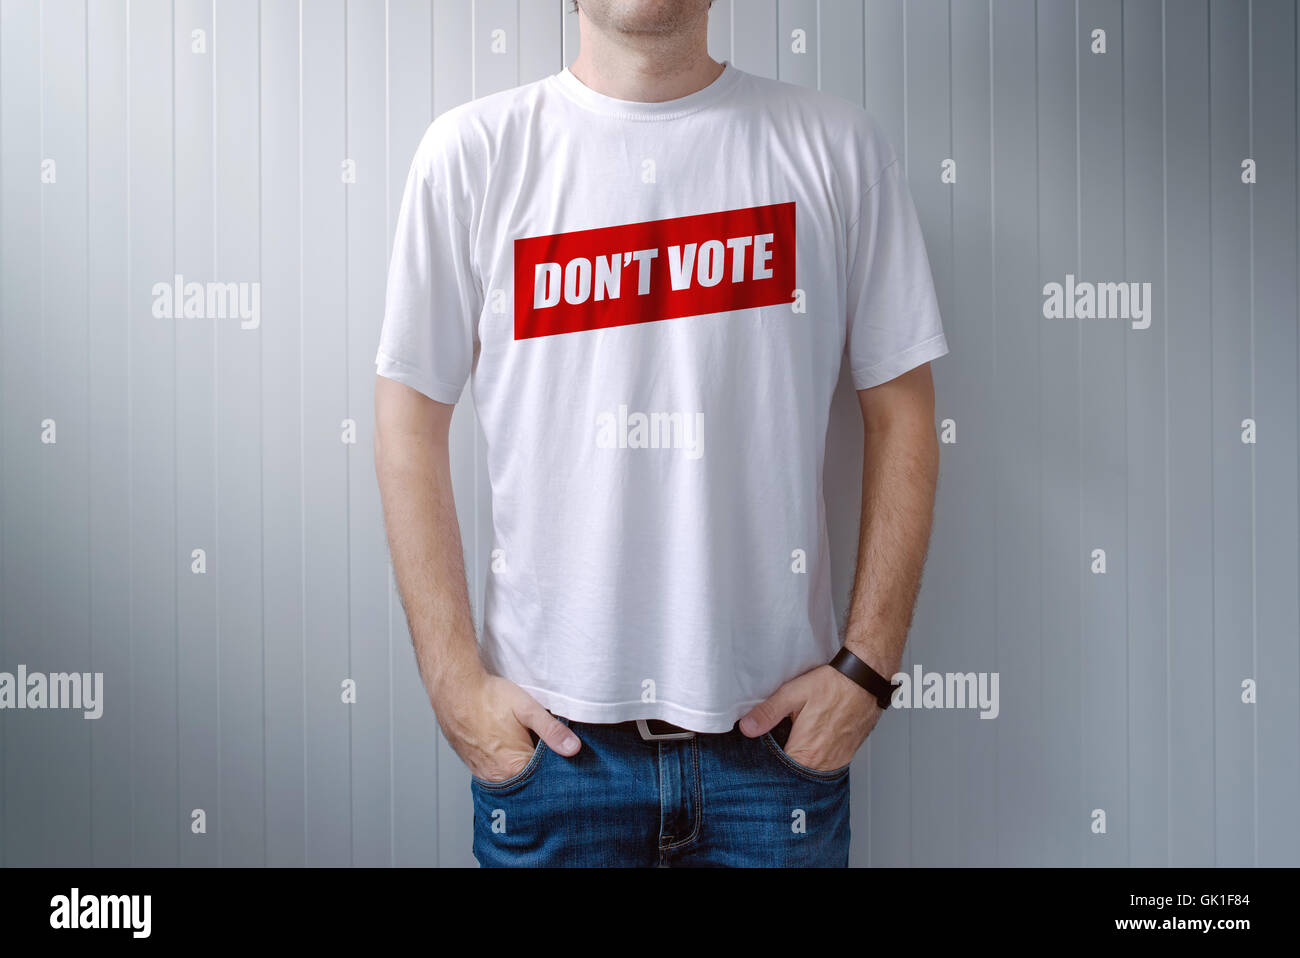 Handsome man wearing shirt with Don't vote title printed on chest, express attitude and opinion on political elections Stock Photo